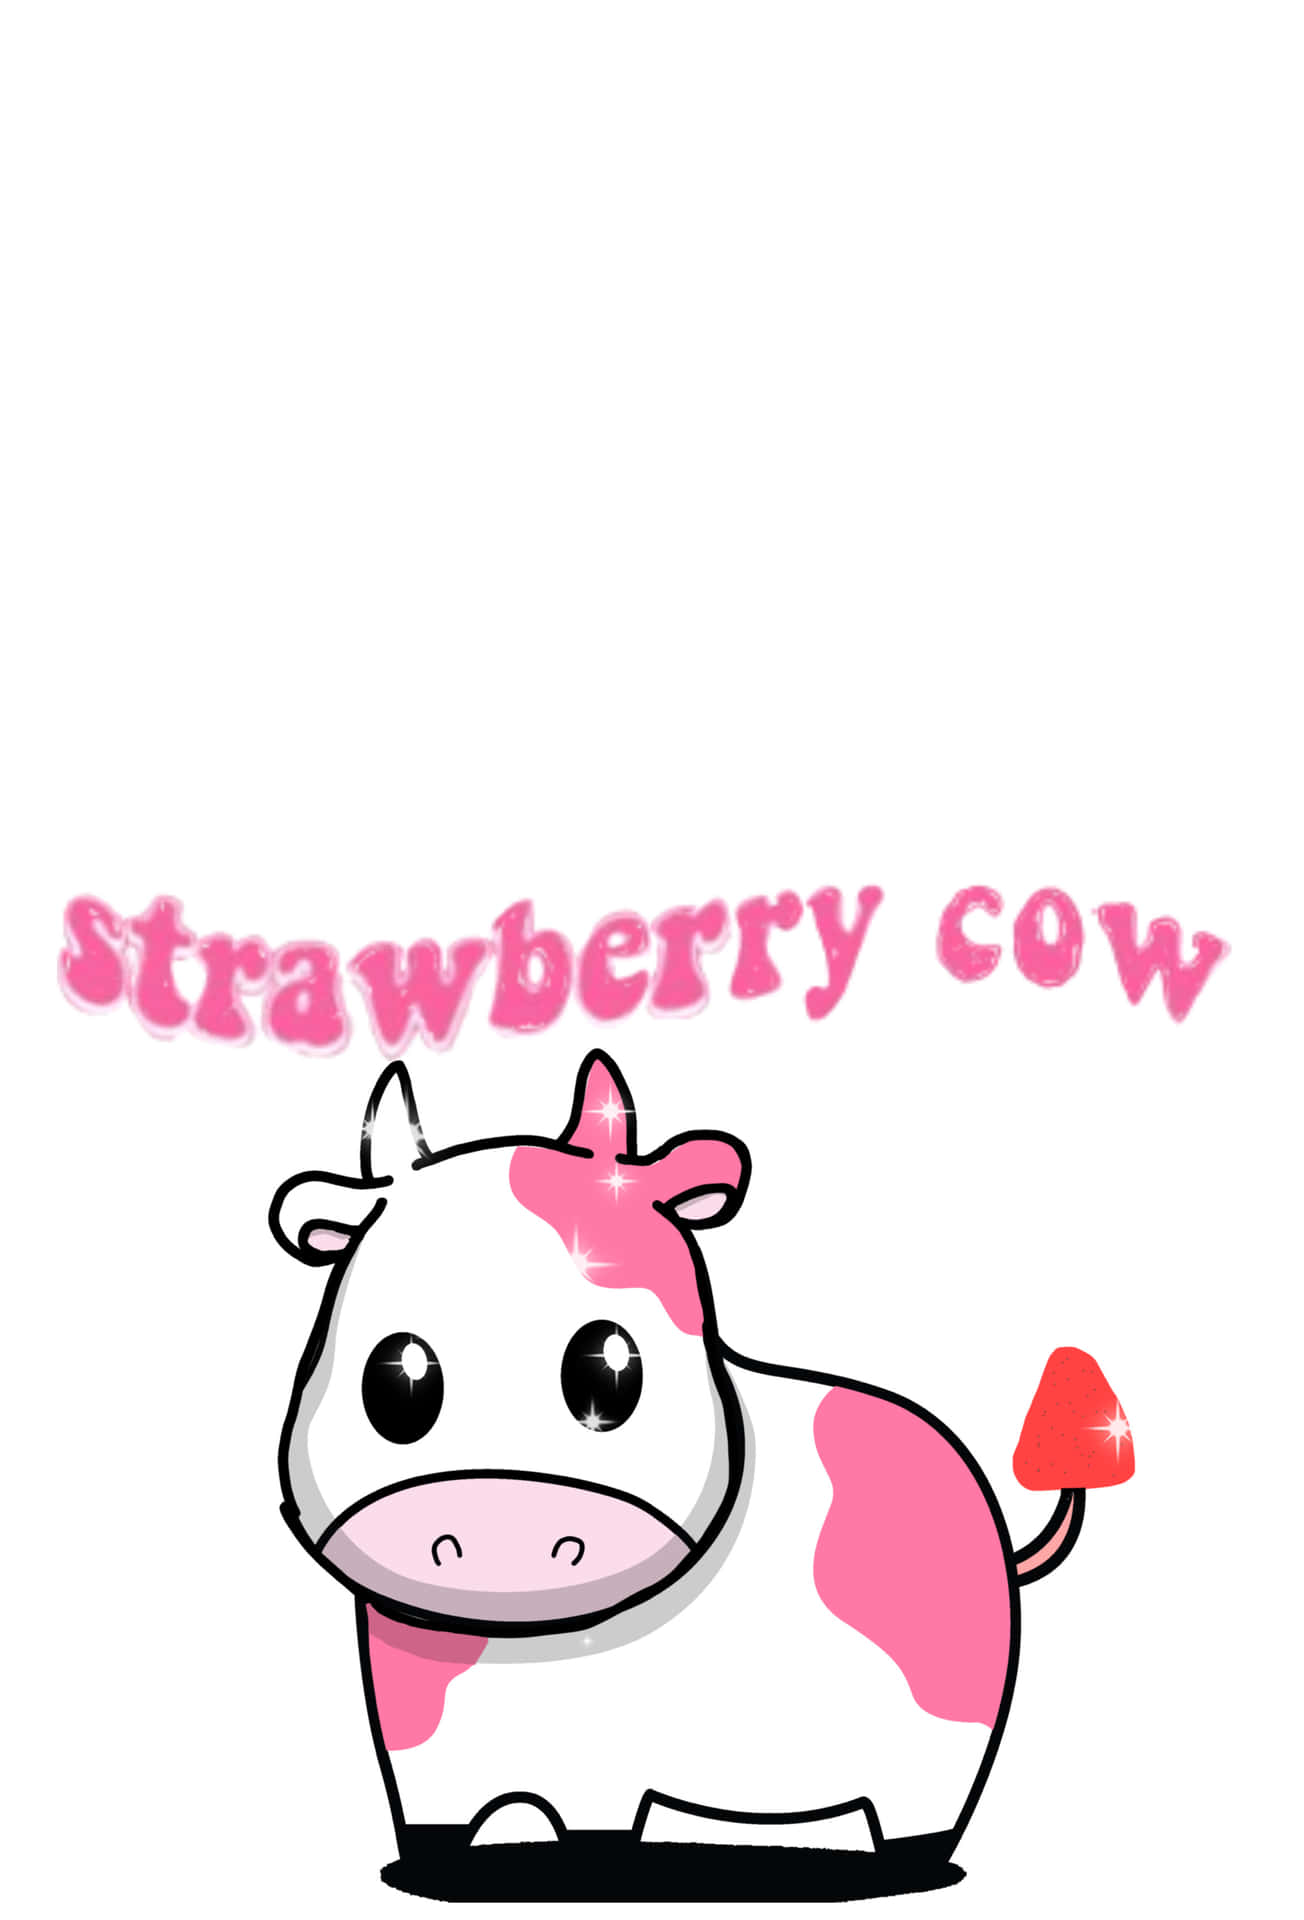 Download Strawberry Cow By Sassy_sassy Wallpaper | Wallpapers.com